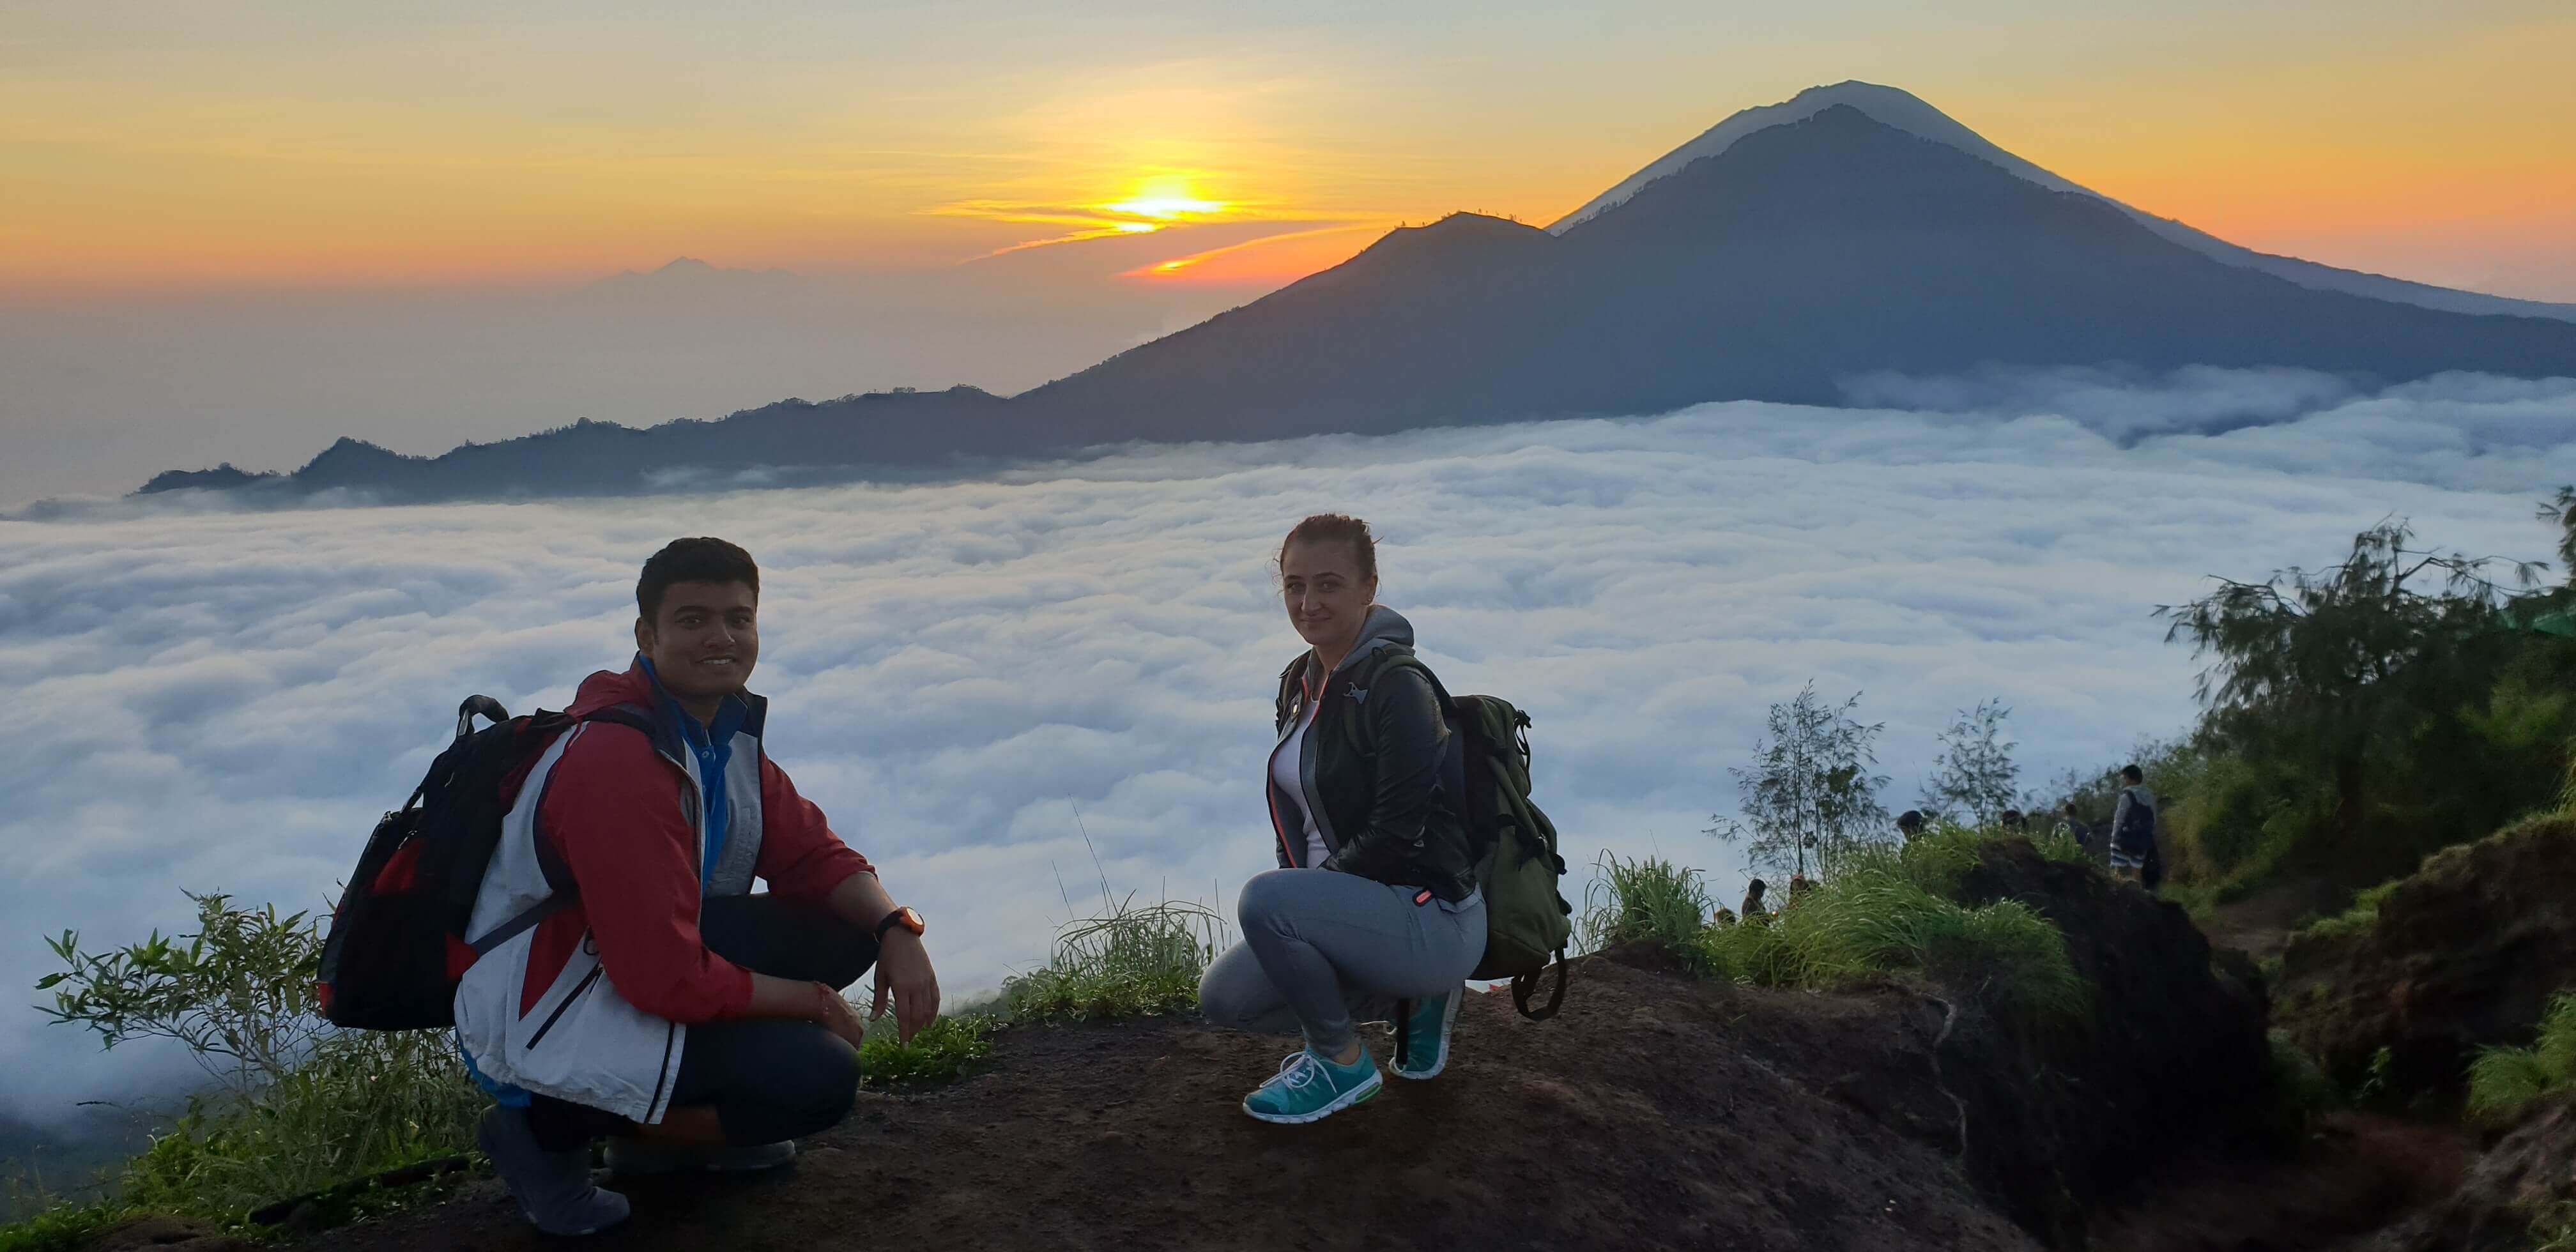 If you are into adventure, you have to include the Mount Batur Sunrise trek in your 10 day Bali itinerary 